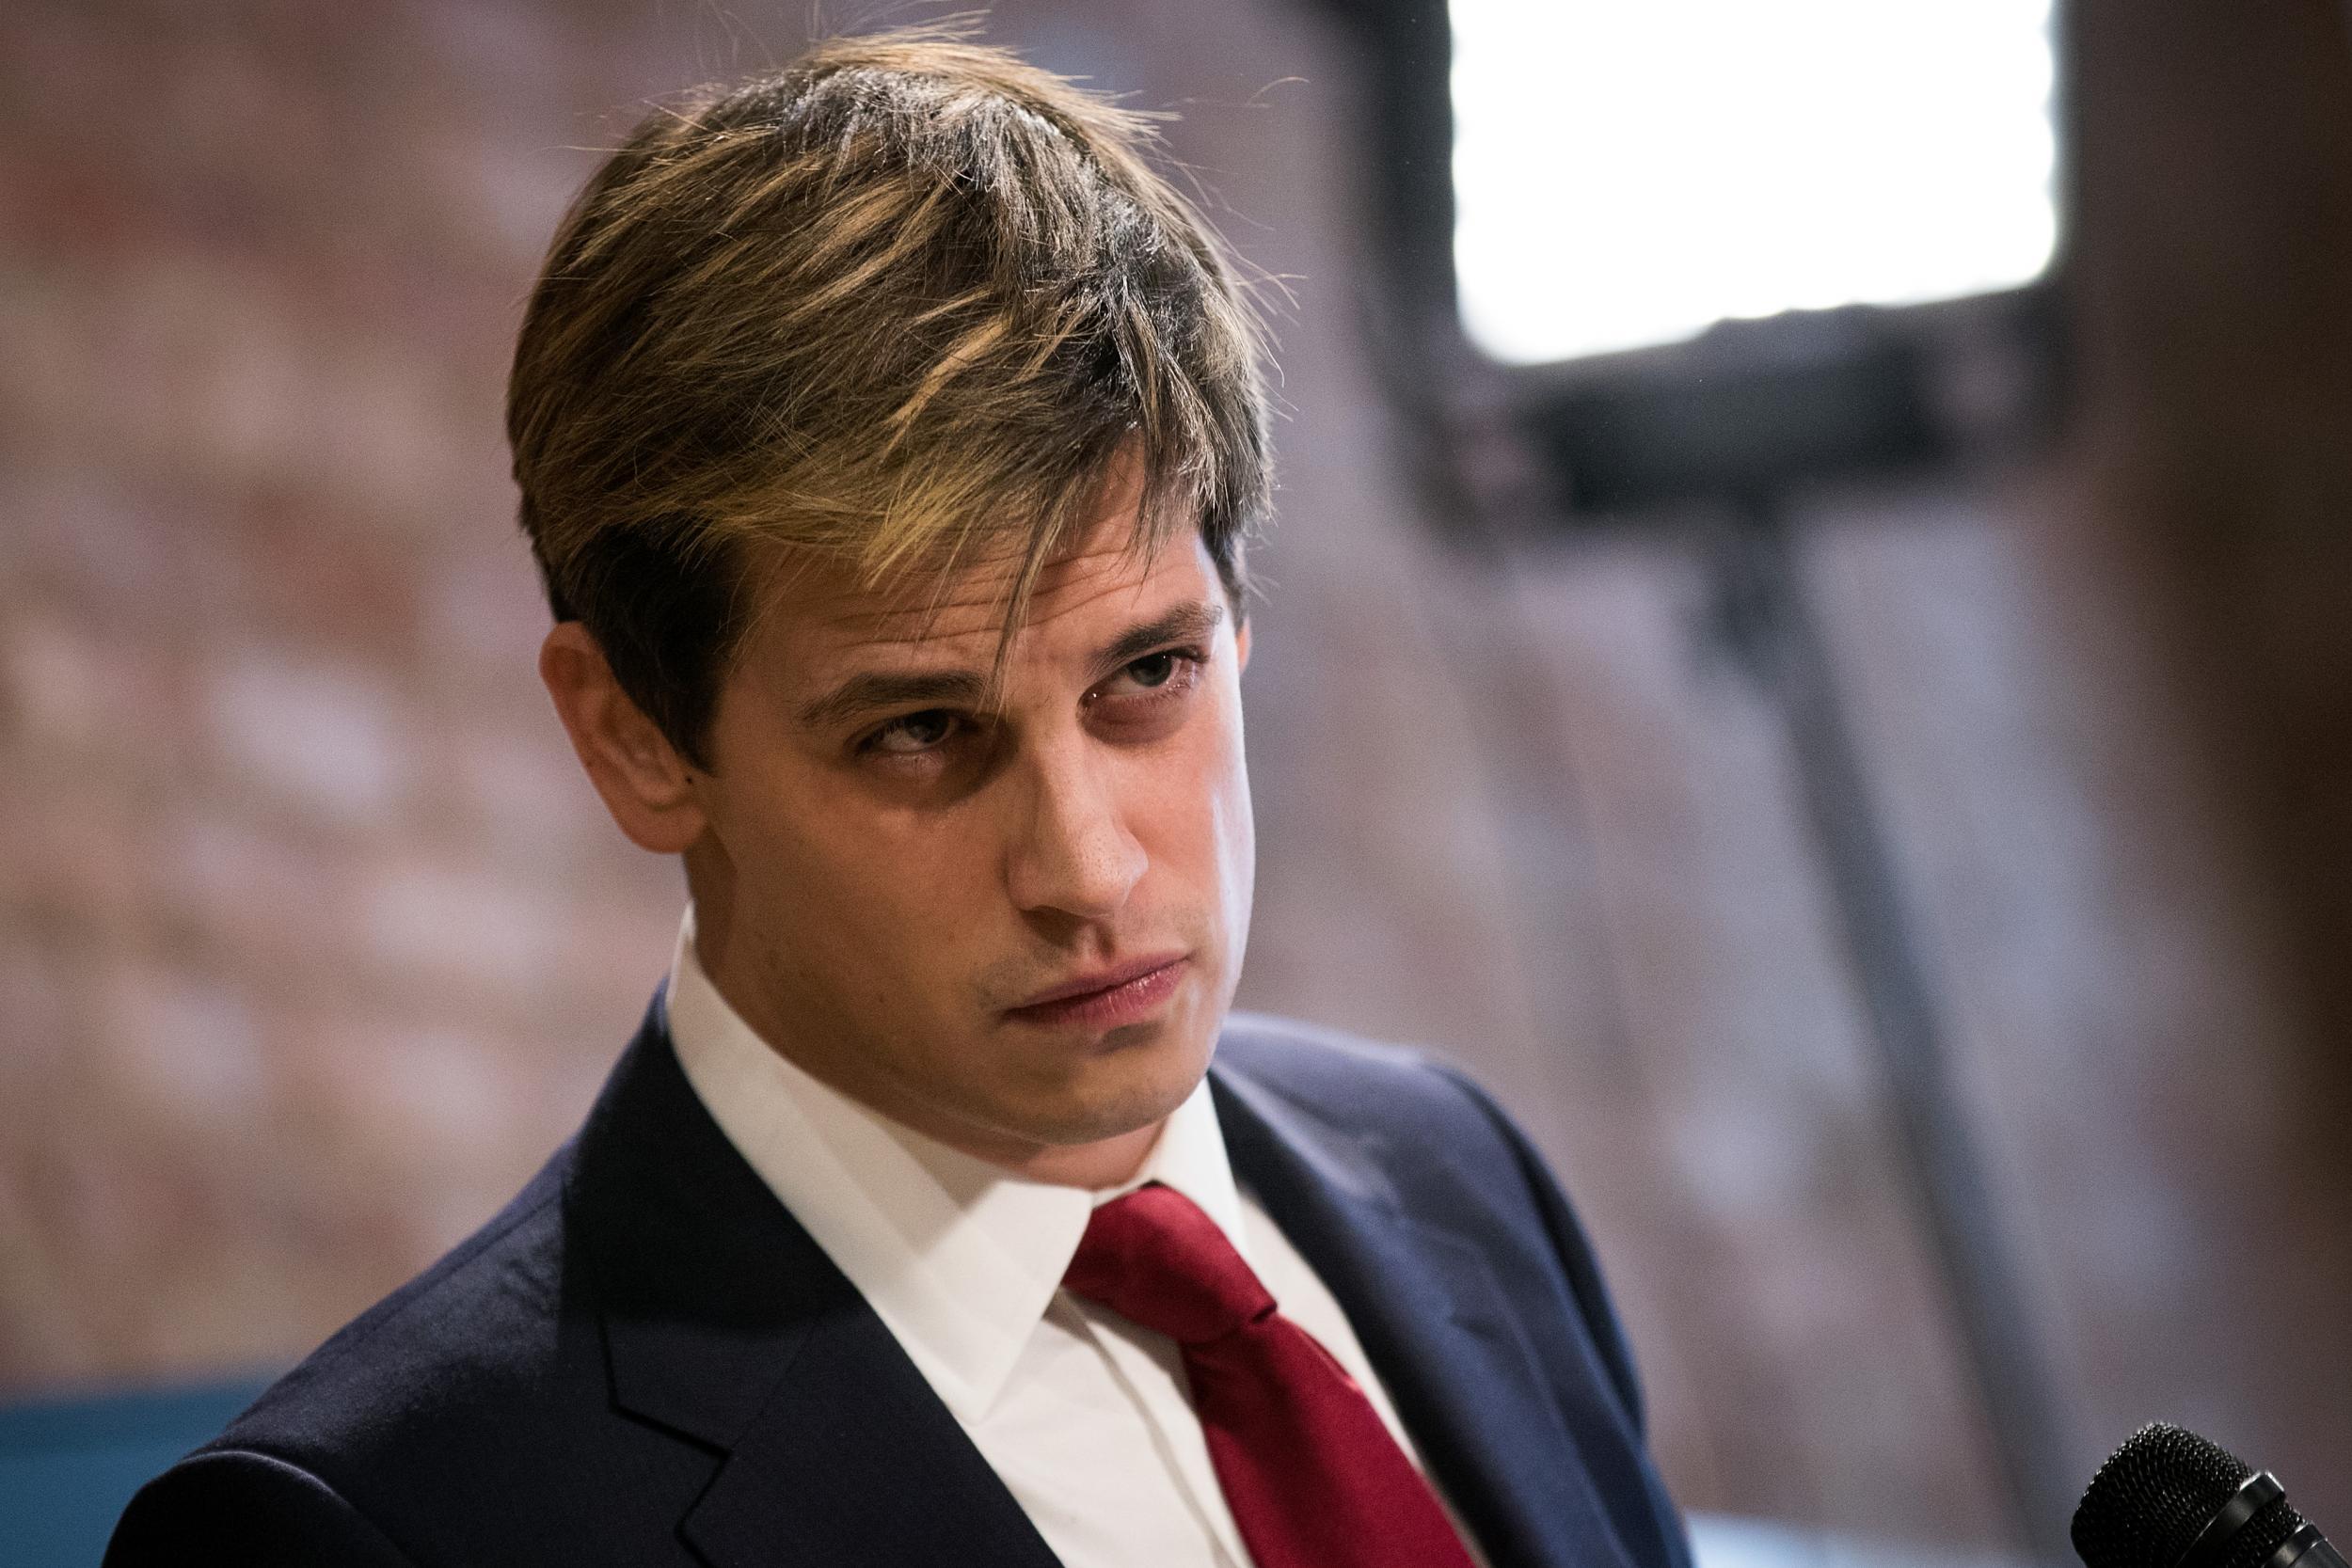 Mr Yiannopoulos’ previous stops at universities in the US have often garnered heated protests